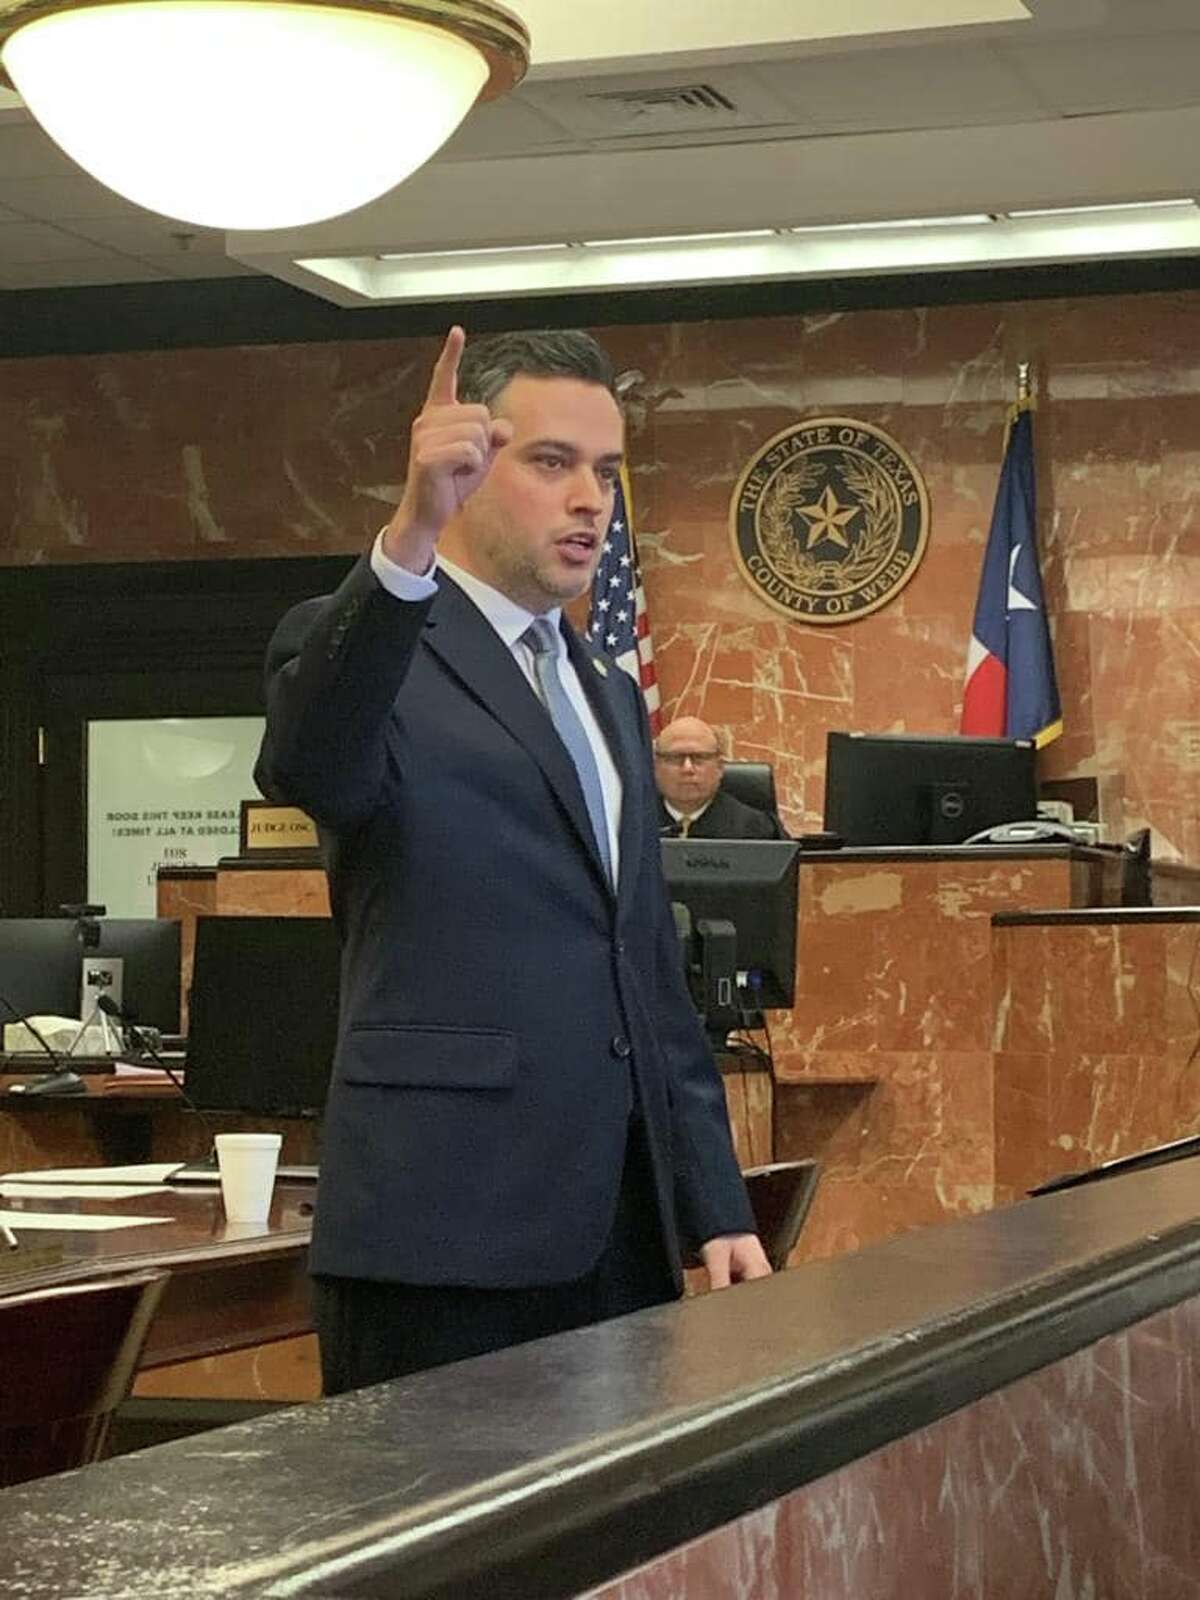 Assistant District Attorney Eduardo Ramirez presented closing arguments in the State of Texas v. Rene Salas, who was sentenced to 30 years in prison.